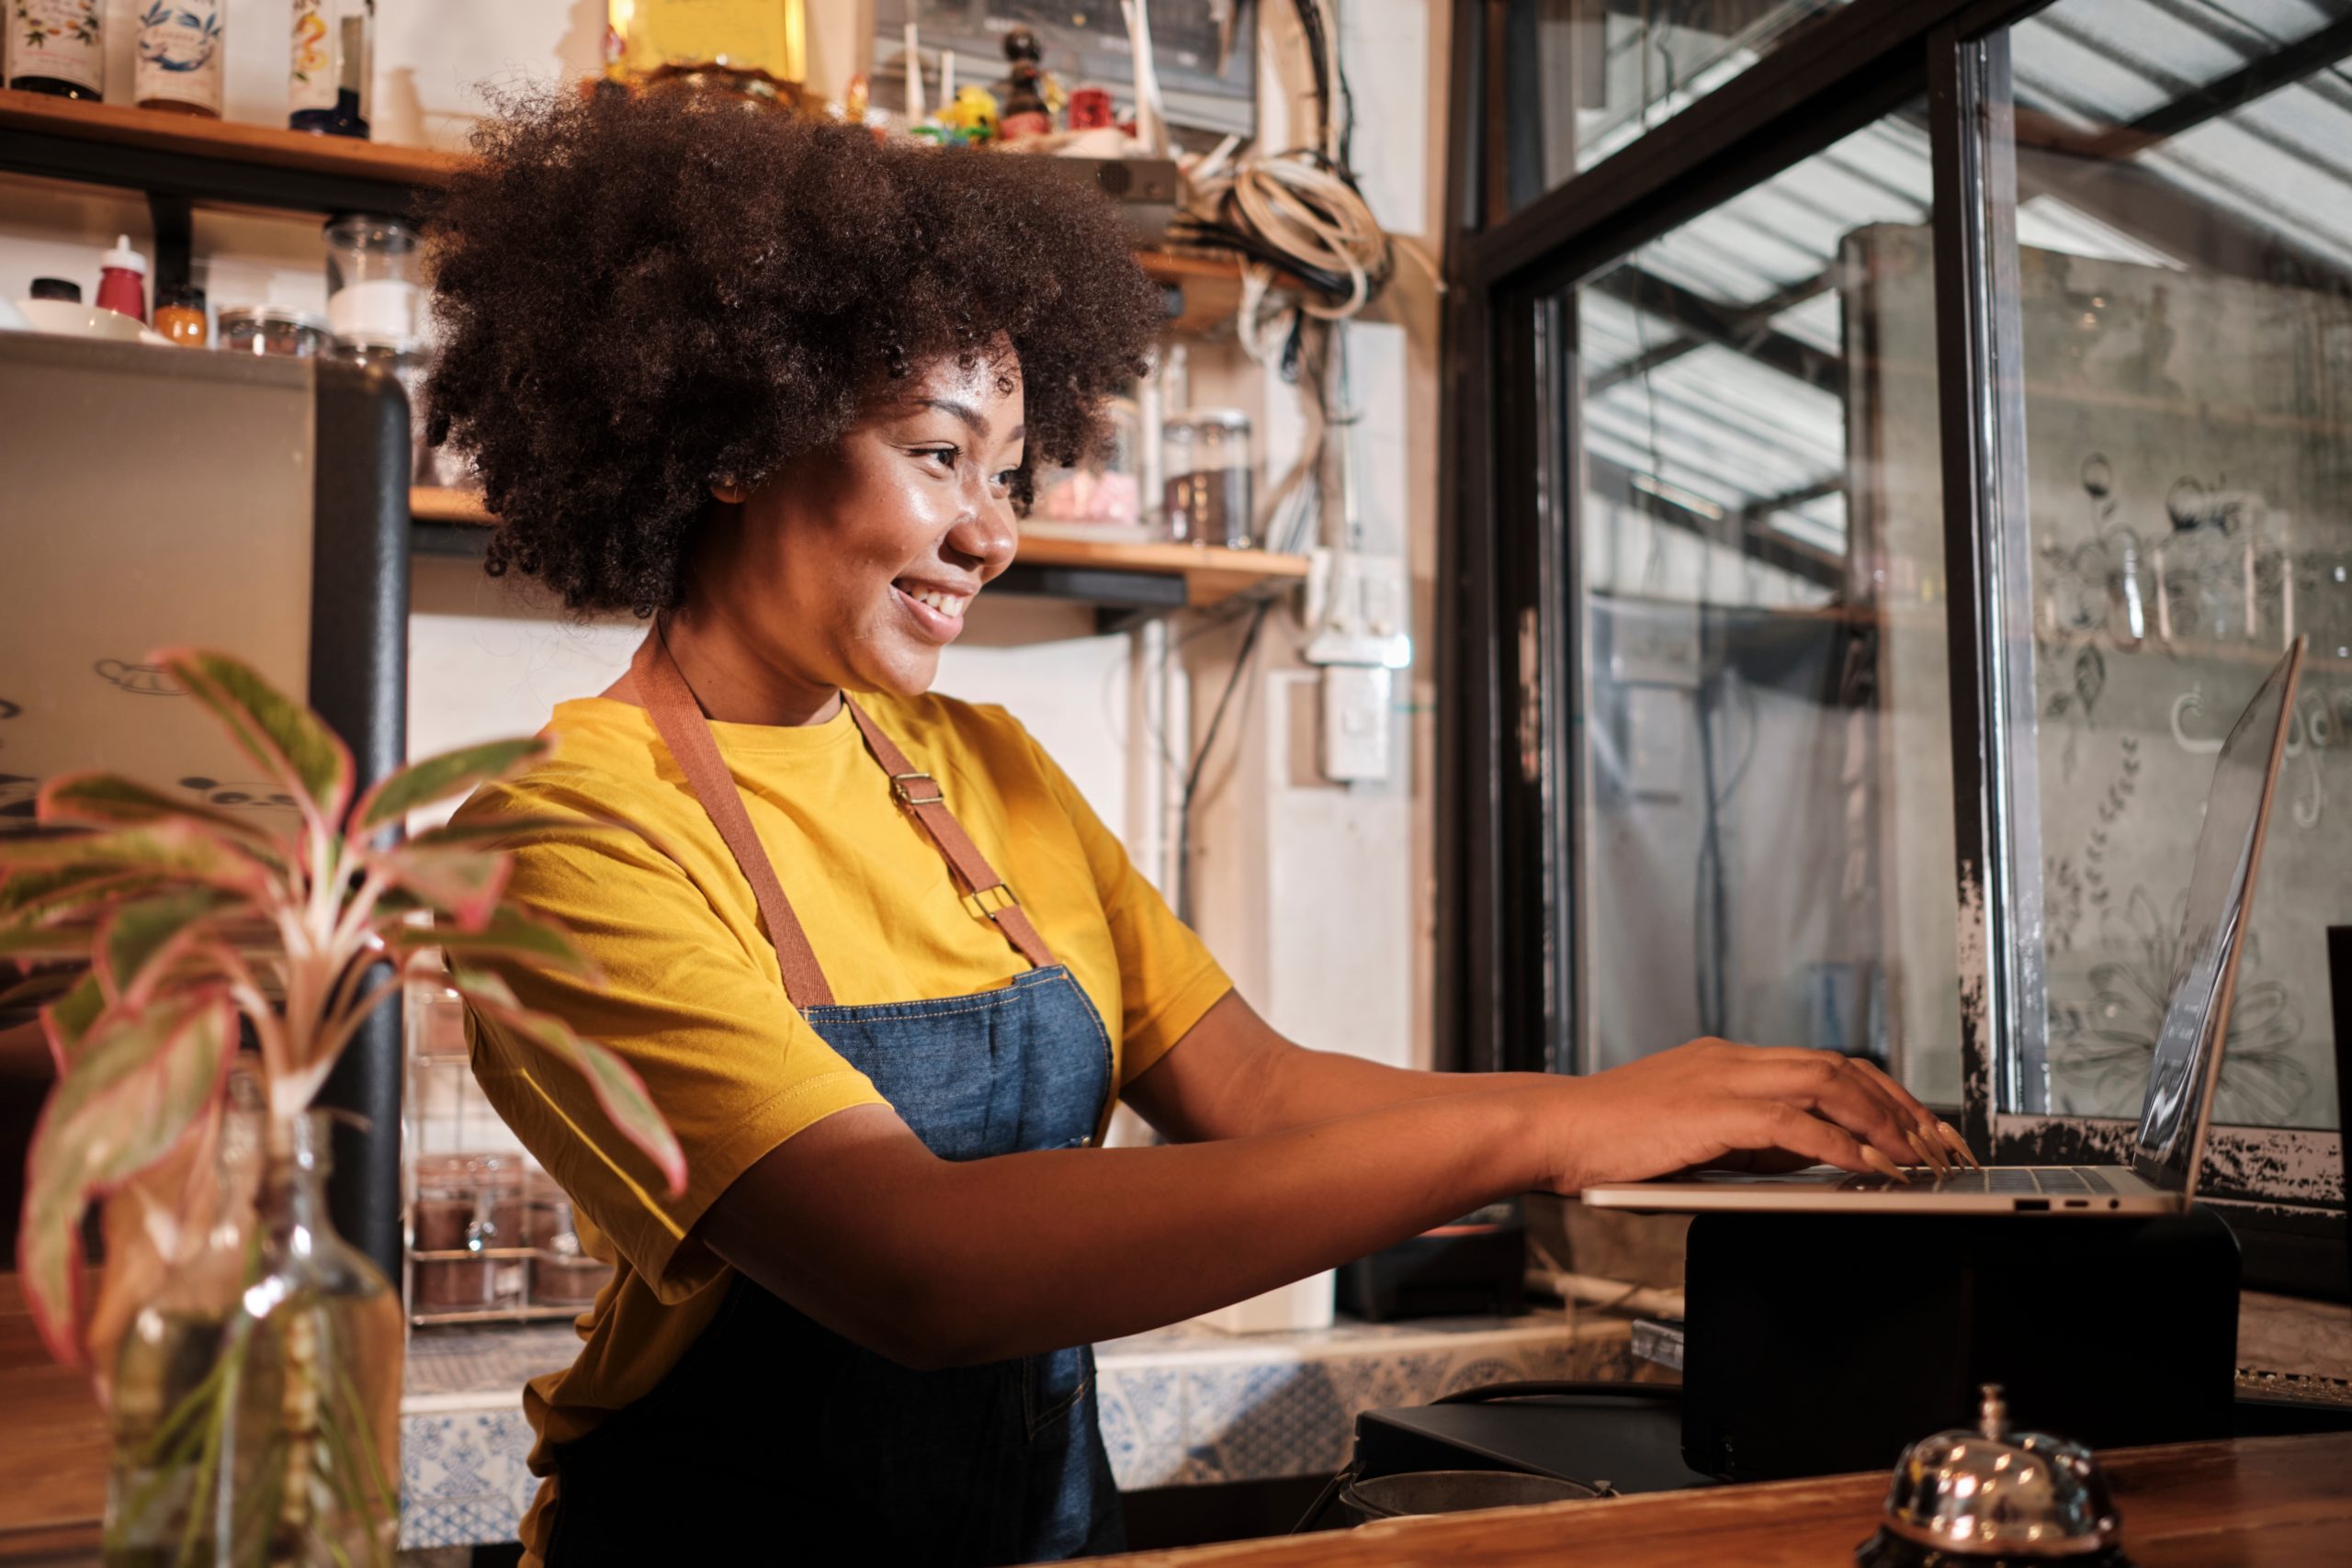  A smiling female cafe worker uses a computer at work. 